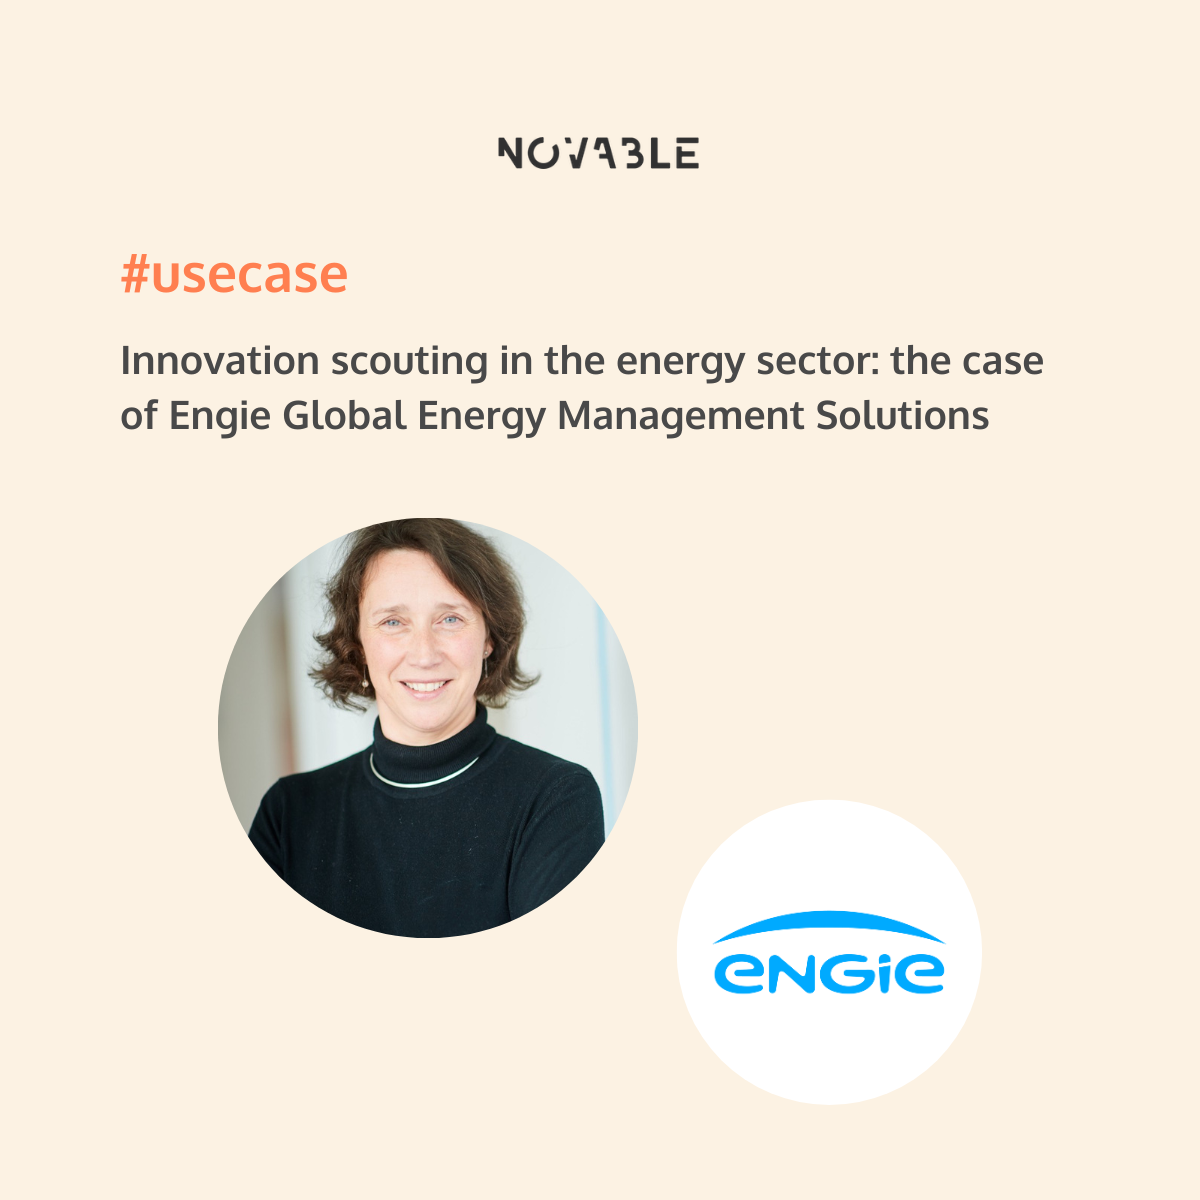 Engie Global Energy Management Solutions